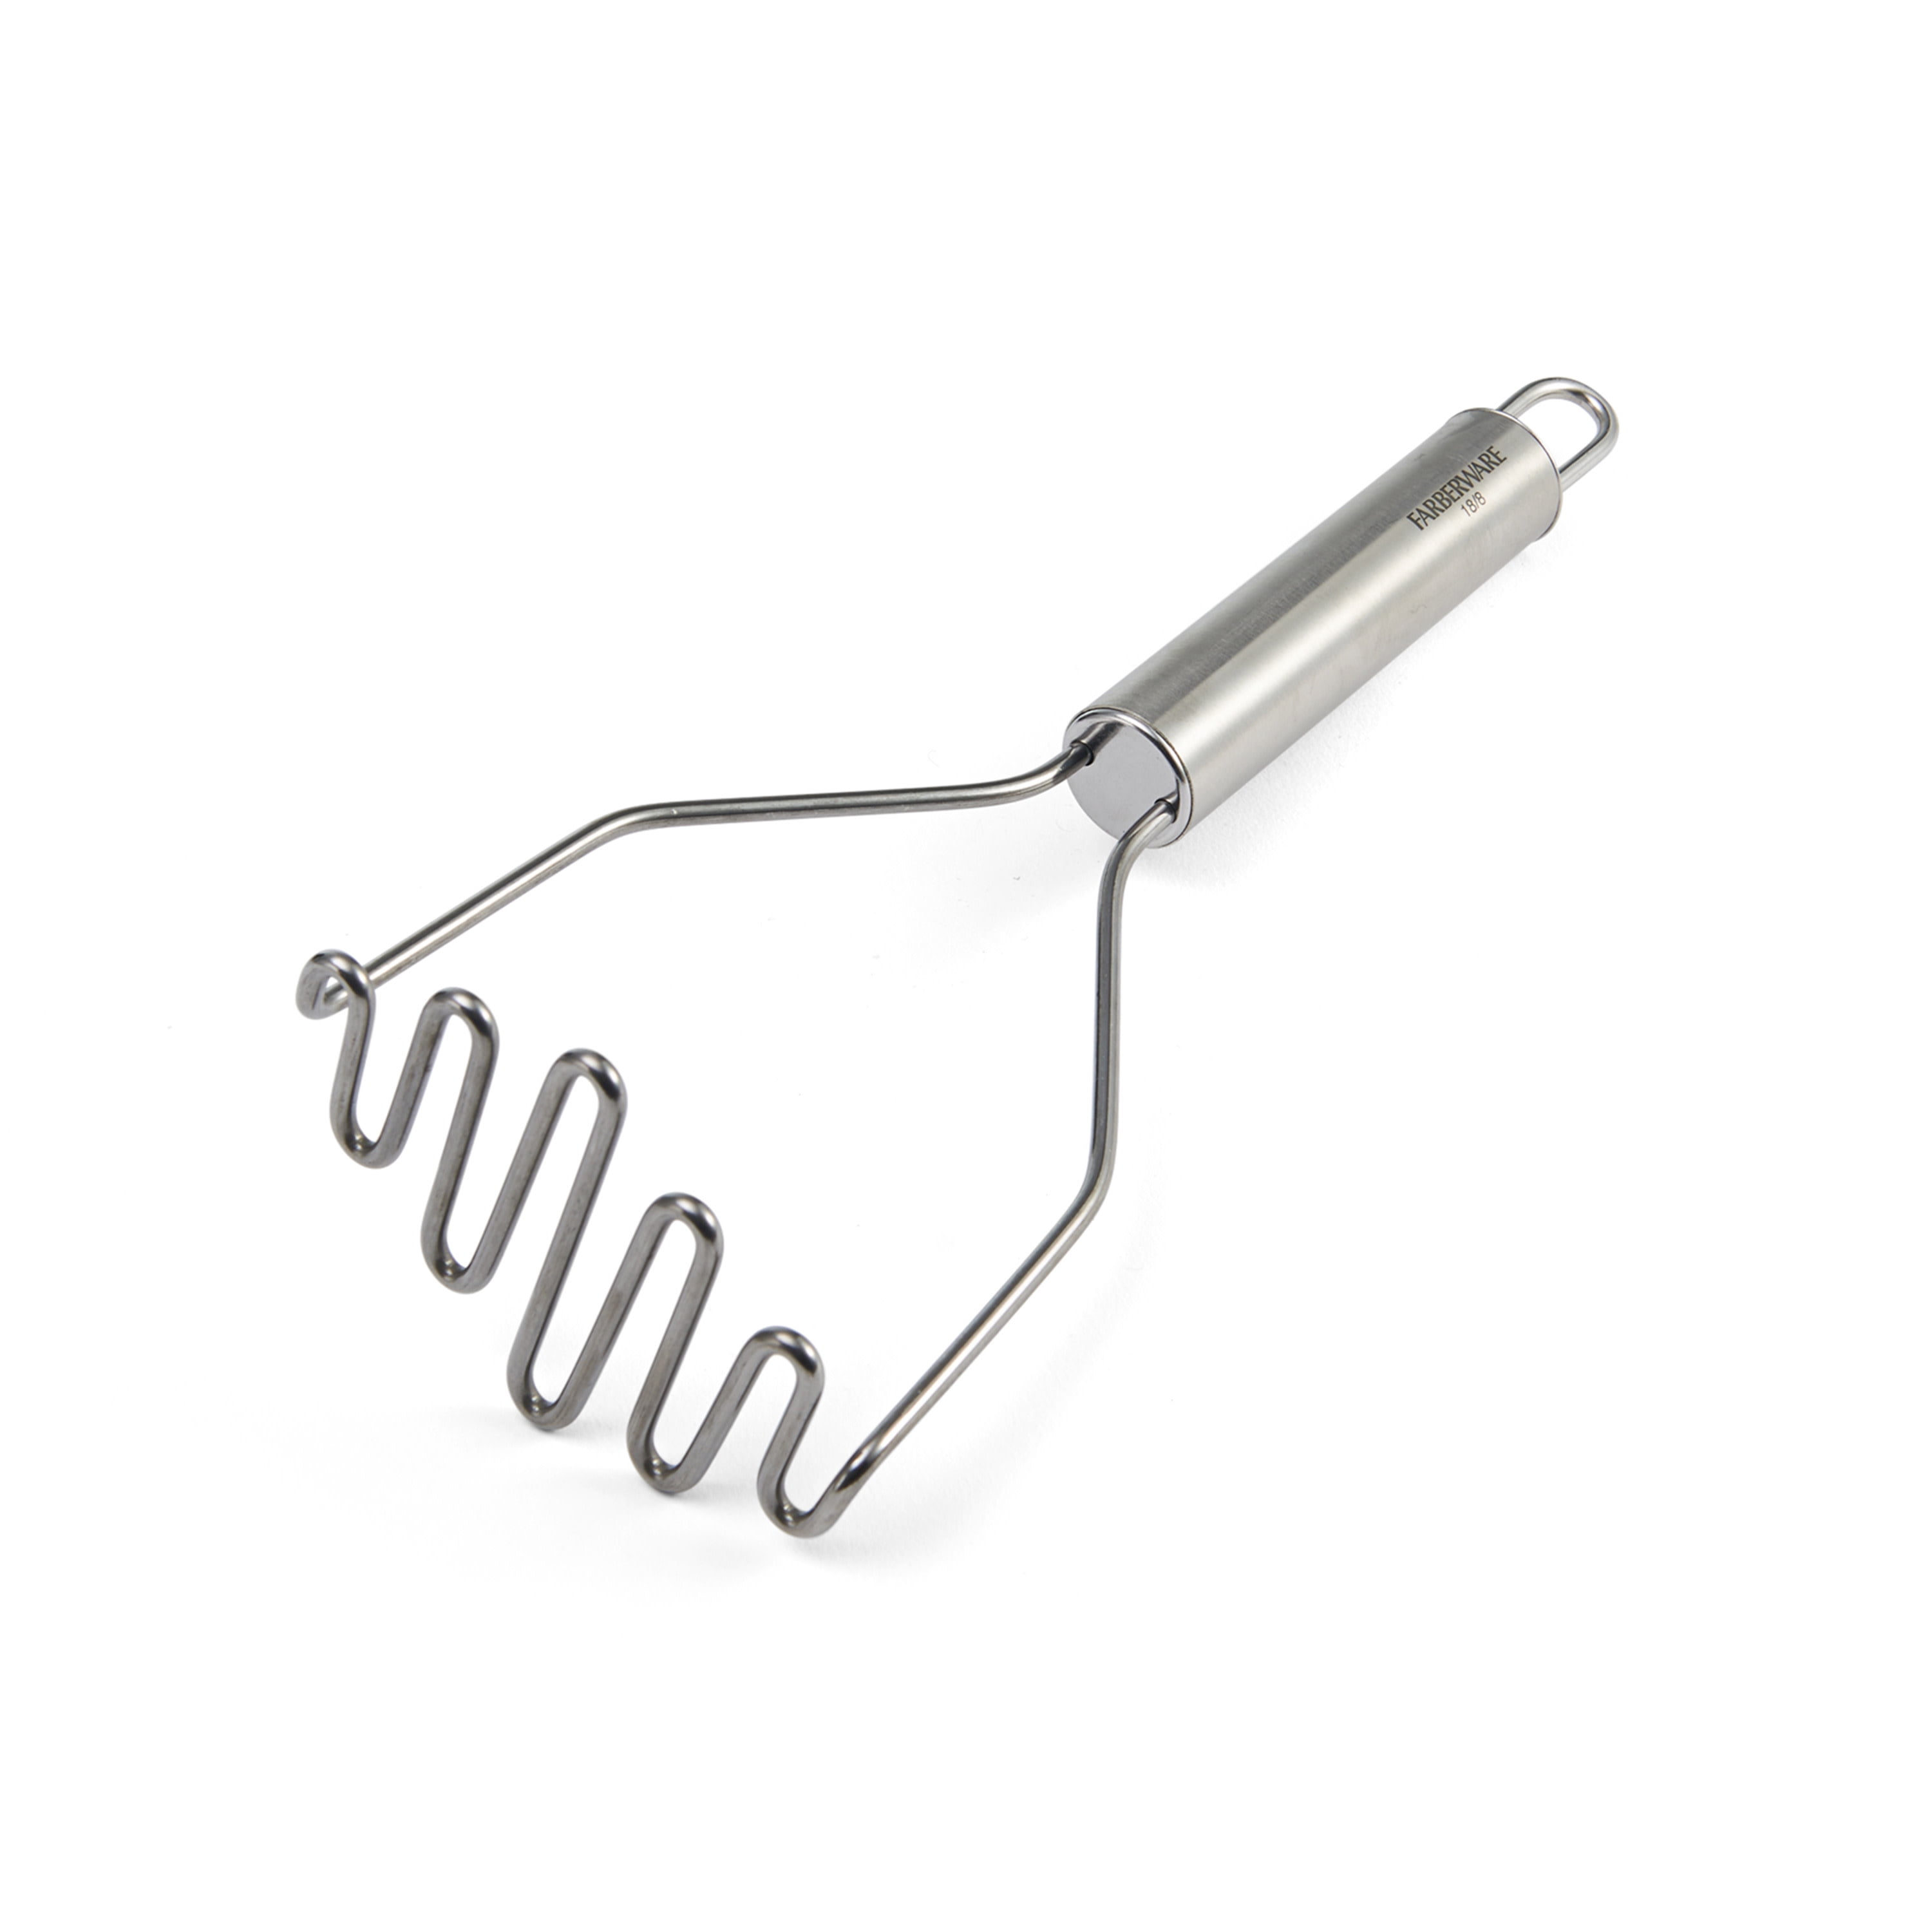 Farberware Meat and Potato Masher: $9 Game-Changing Kitchen Tool – SheKnows